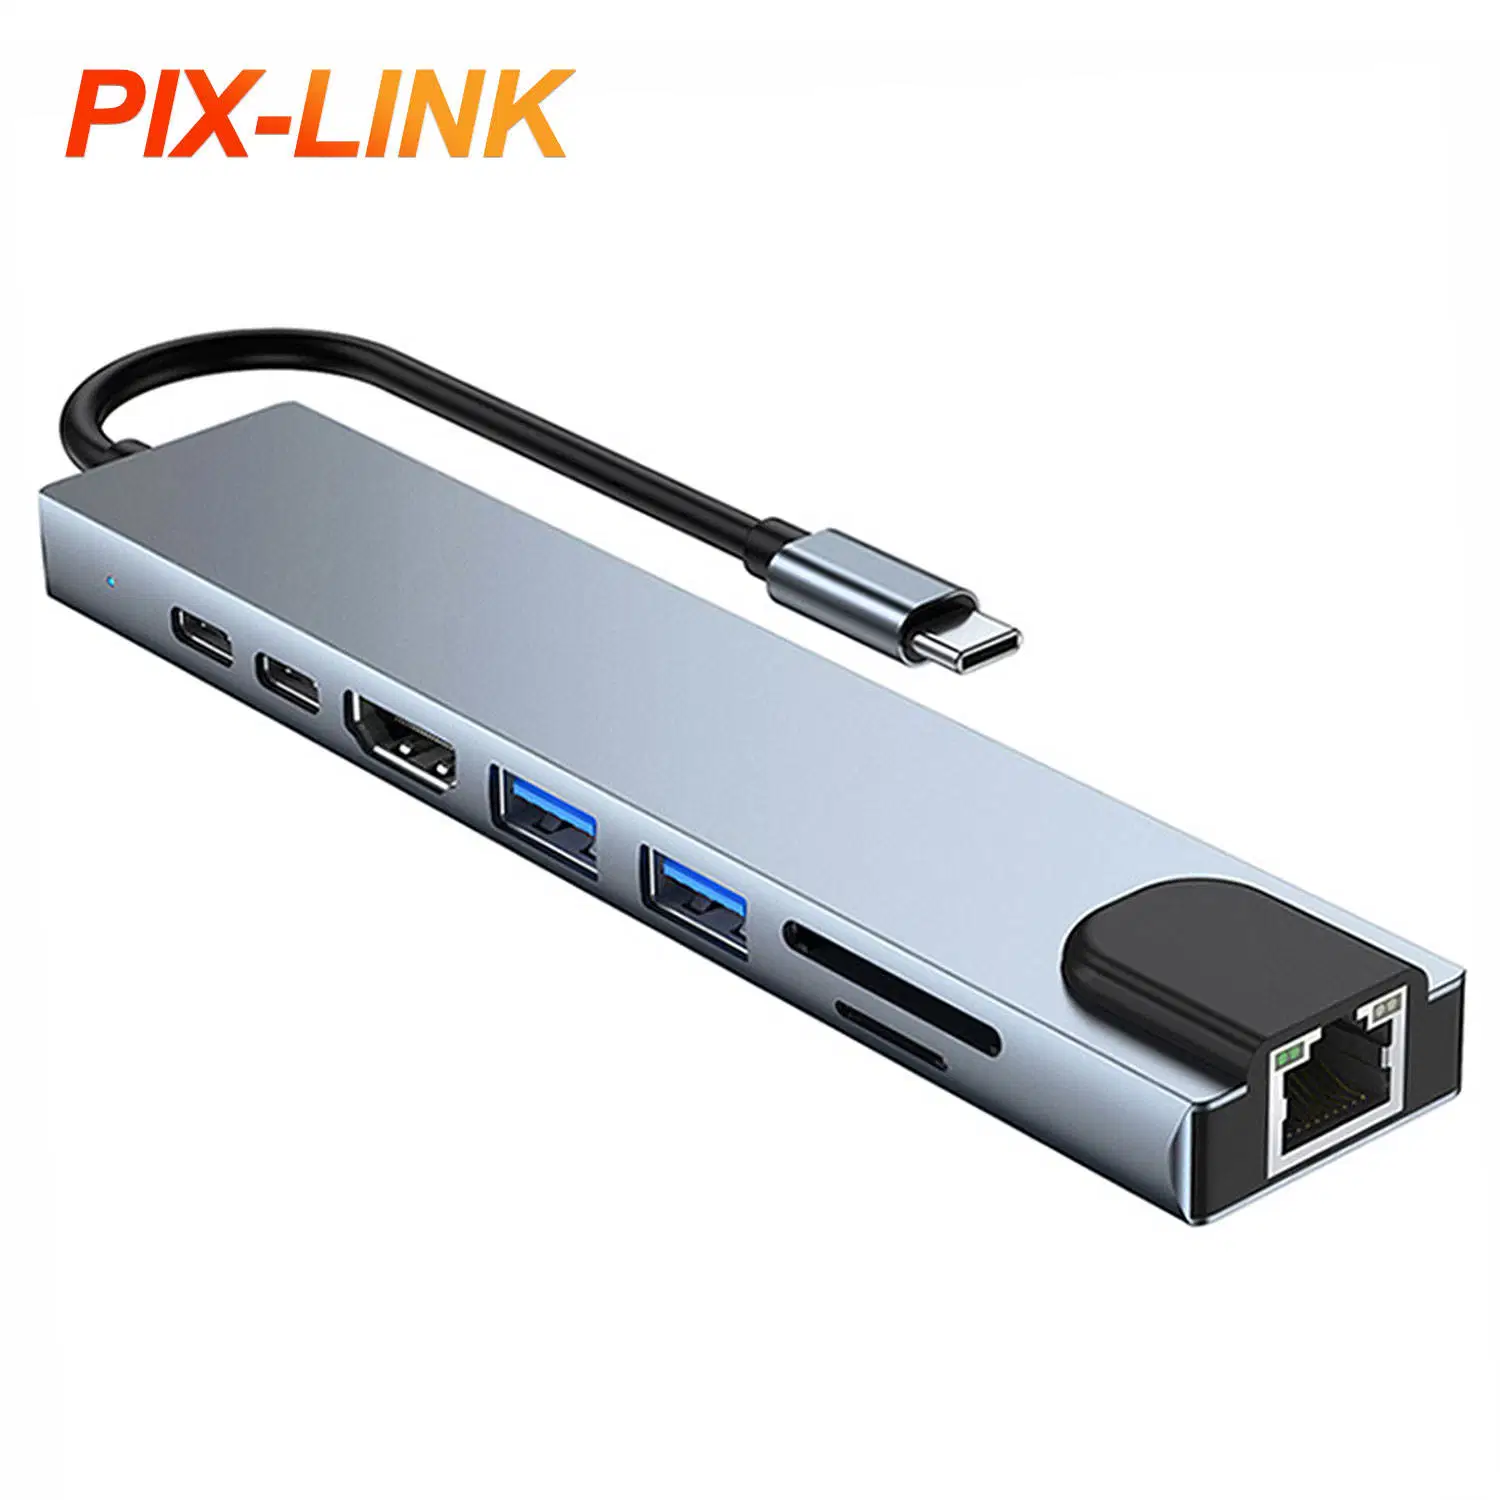 Pixlink 8 in 1 SD TF USB3.0 4K-New Type C to RJ45 Matedock Ethernet Adapter Charge USB Hub